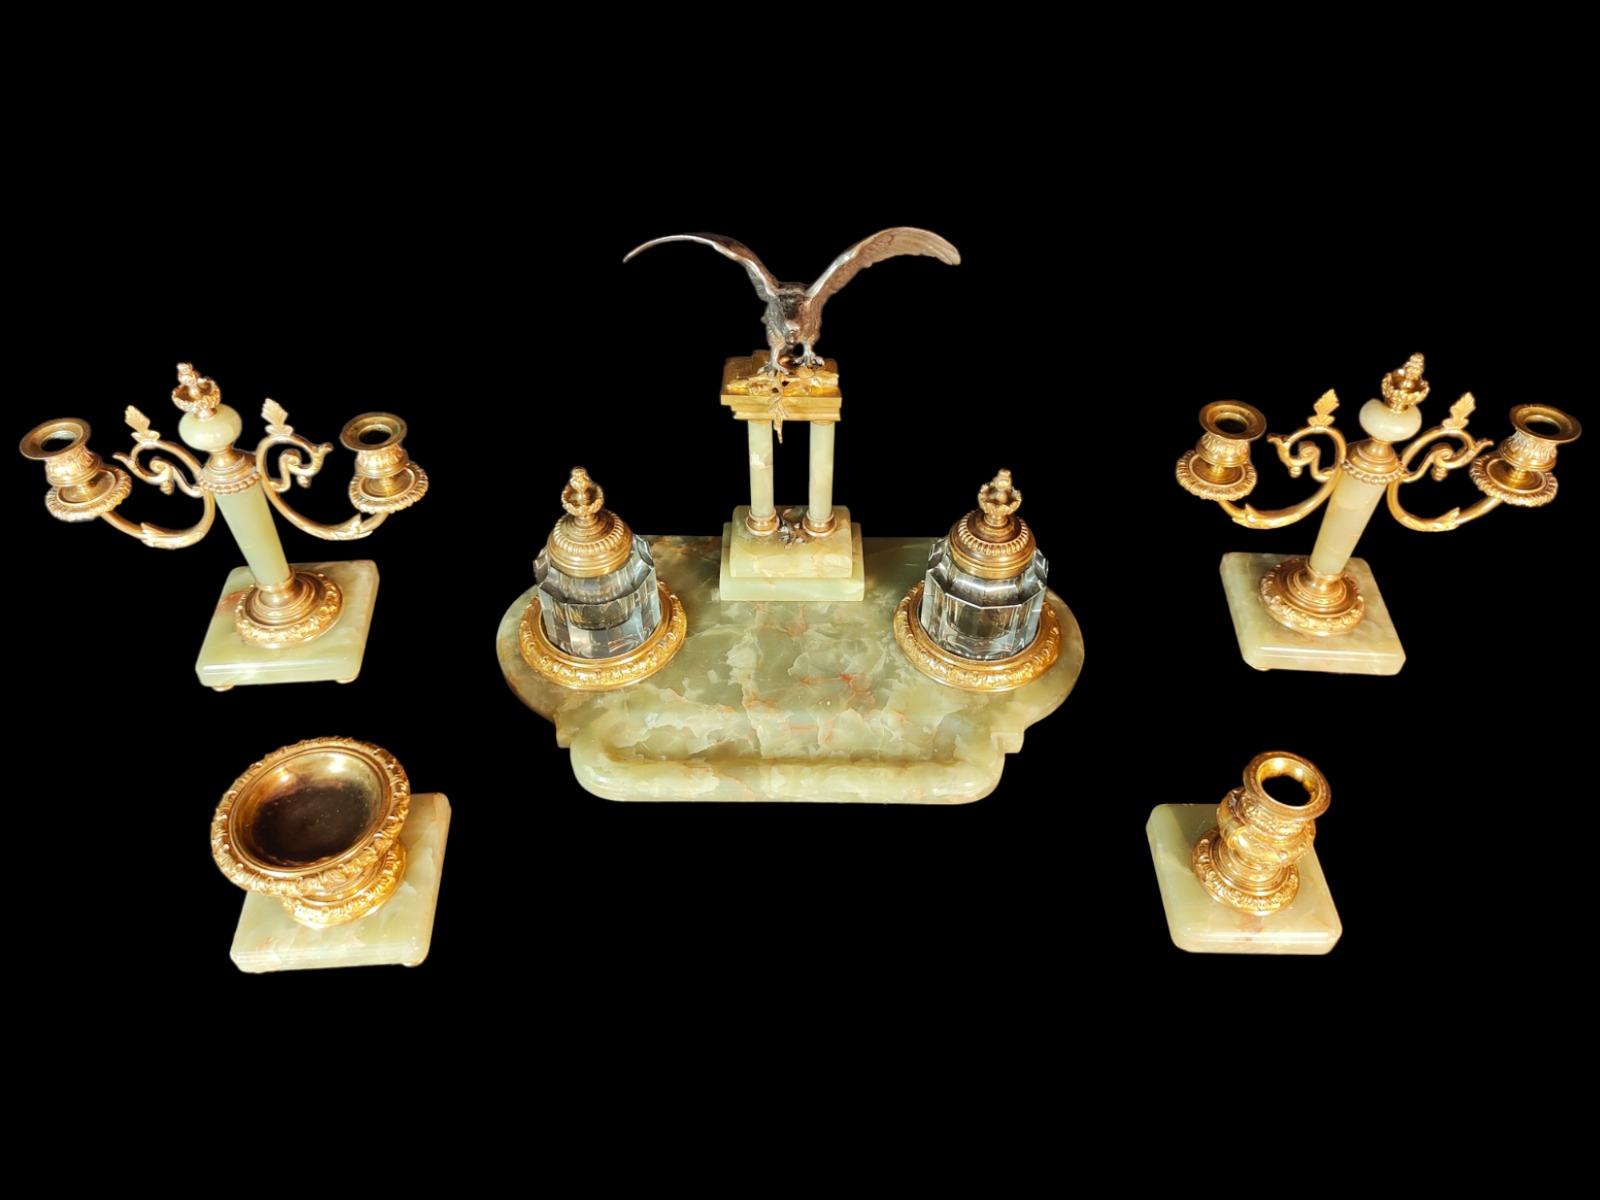 Inkwell Onyx France-russia XIXth.
Onyx inkwell France-Russia XIXth. Elegant inkwell in onyx and gilded bronze and silvered. The bronzes are of high quality and well chiseled by hand. All the parts are in perfect condition. Measurements: 47 x 35 x